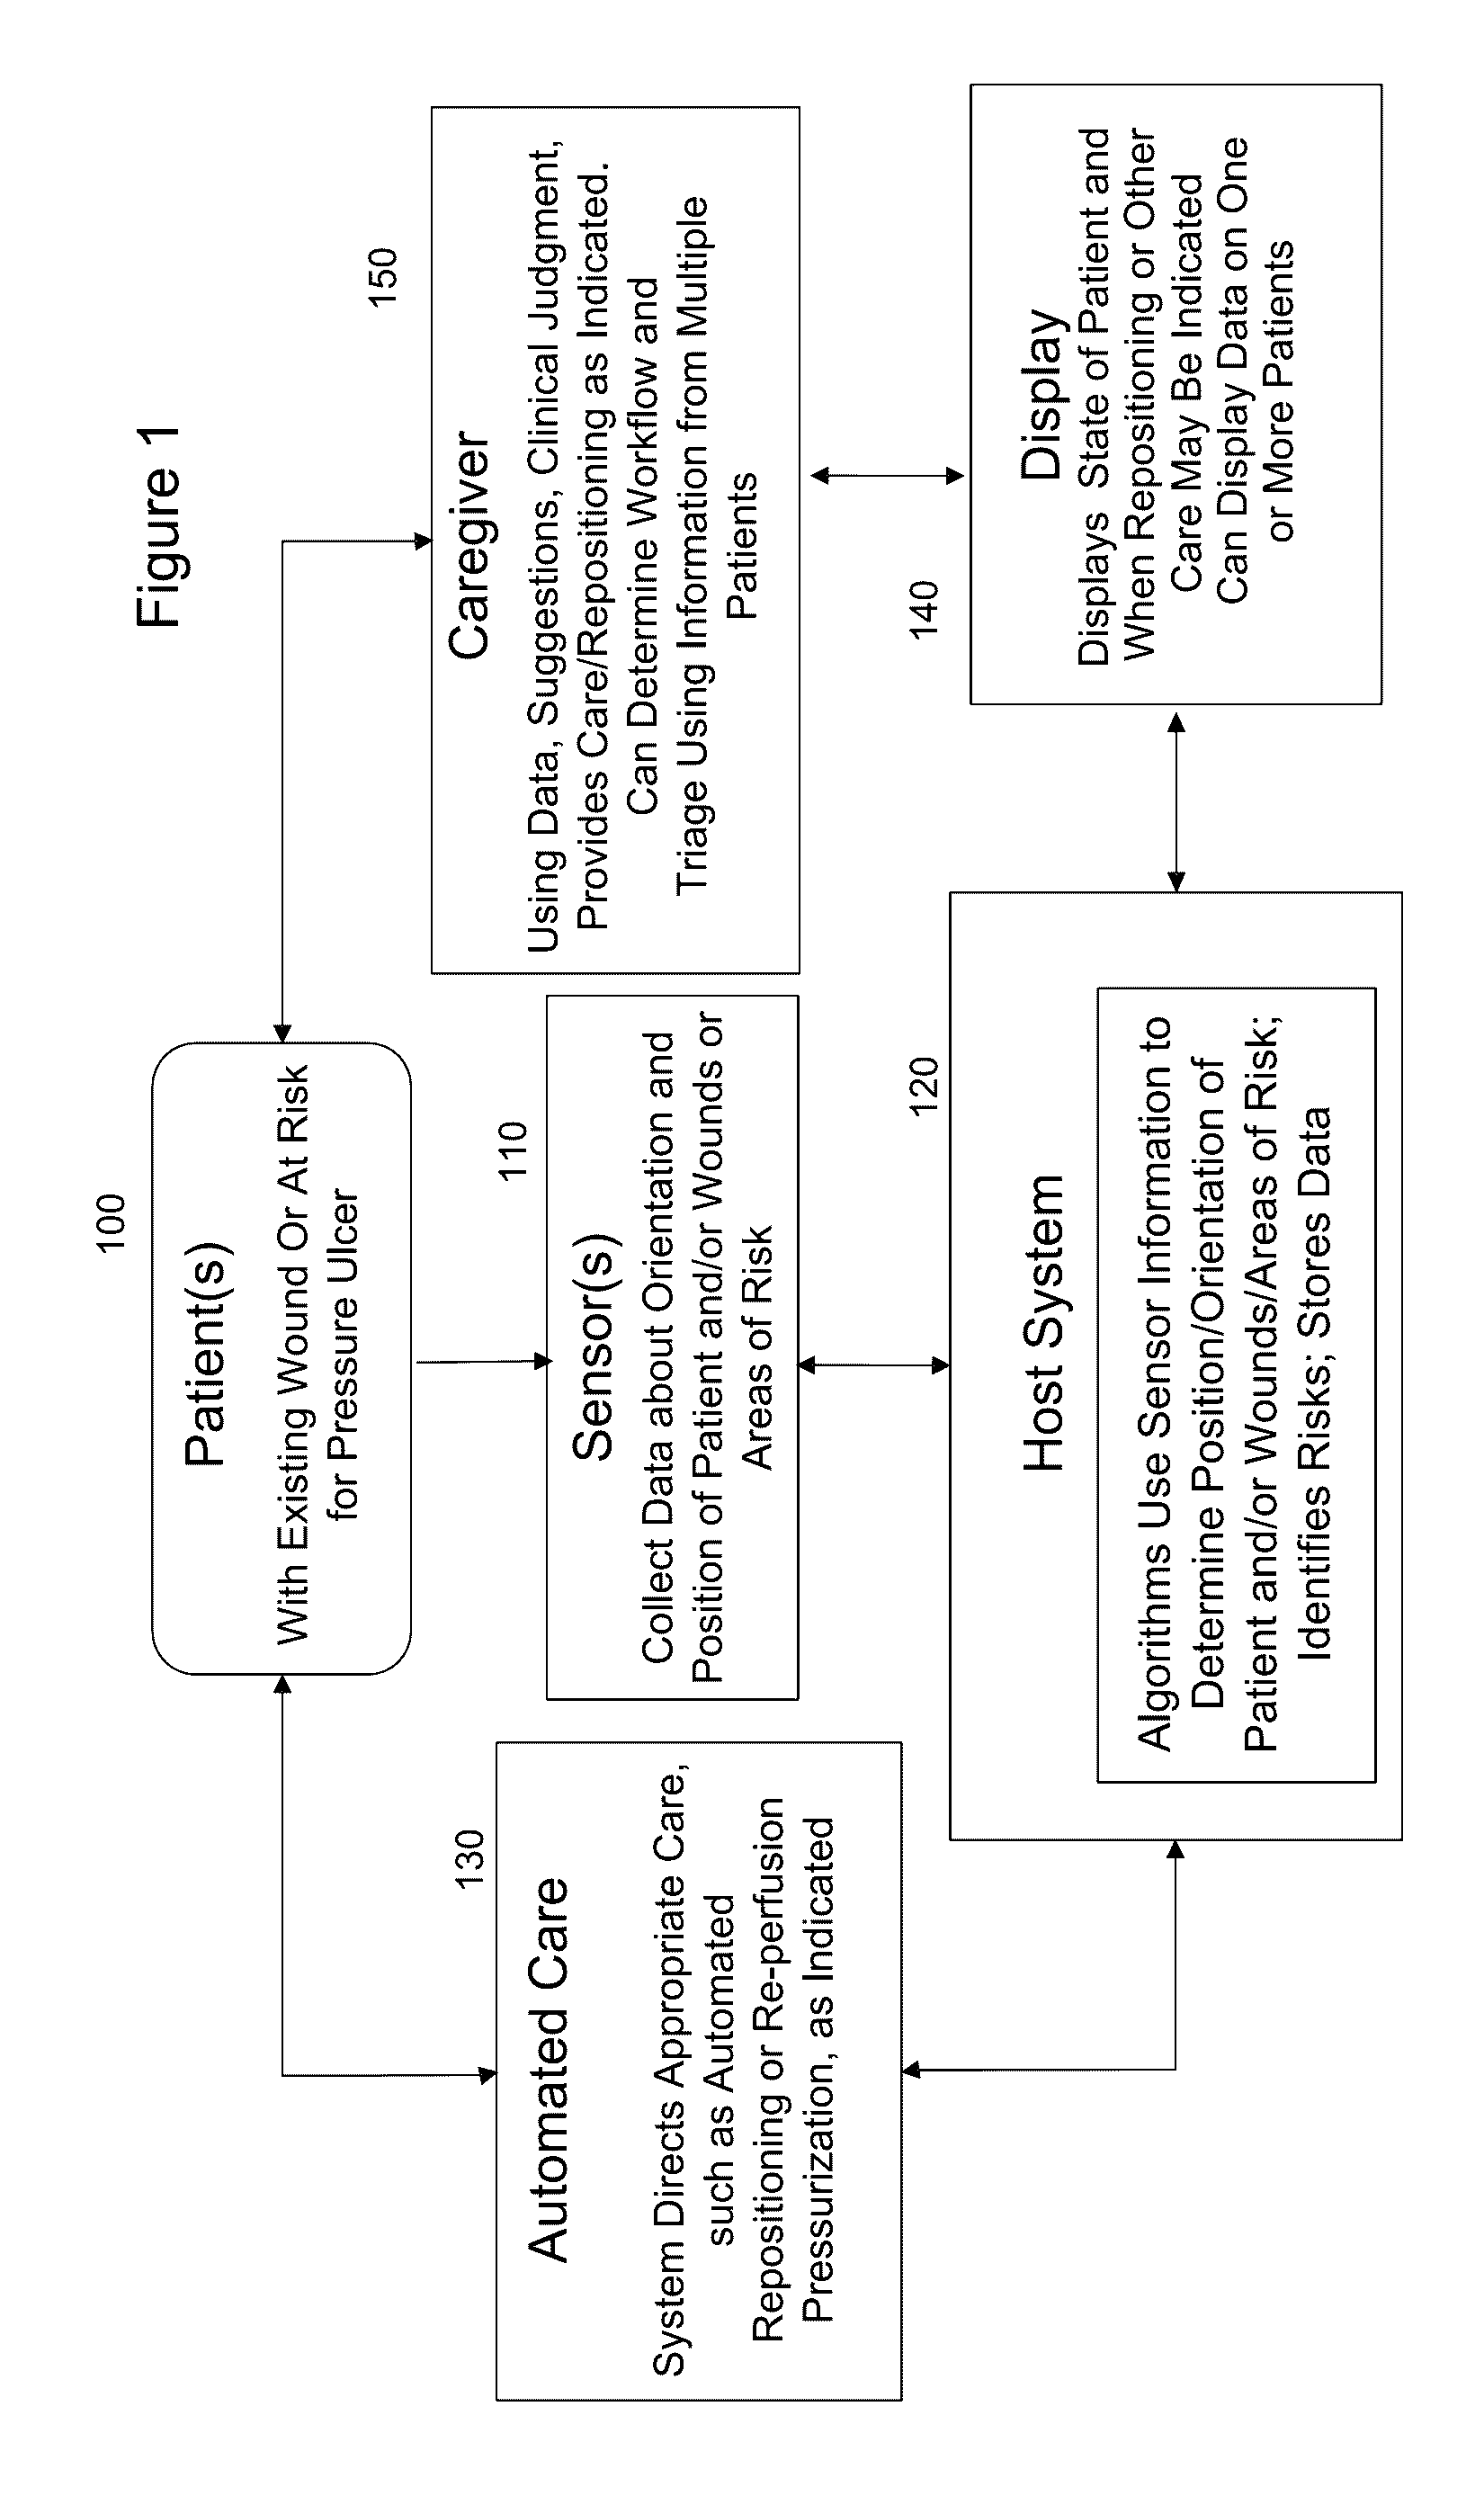 Devices, Systems, and Methods for Preventing, Detecting, and Treating Pressure-Induced Ischemia, Pressure Ulcers, and Other Conditions